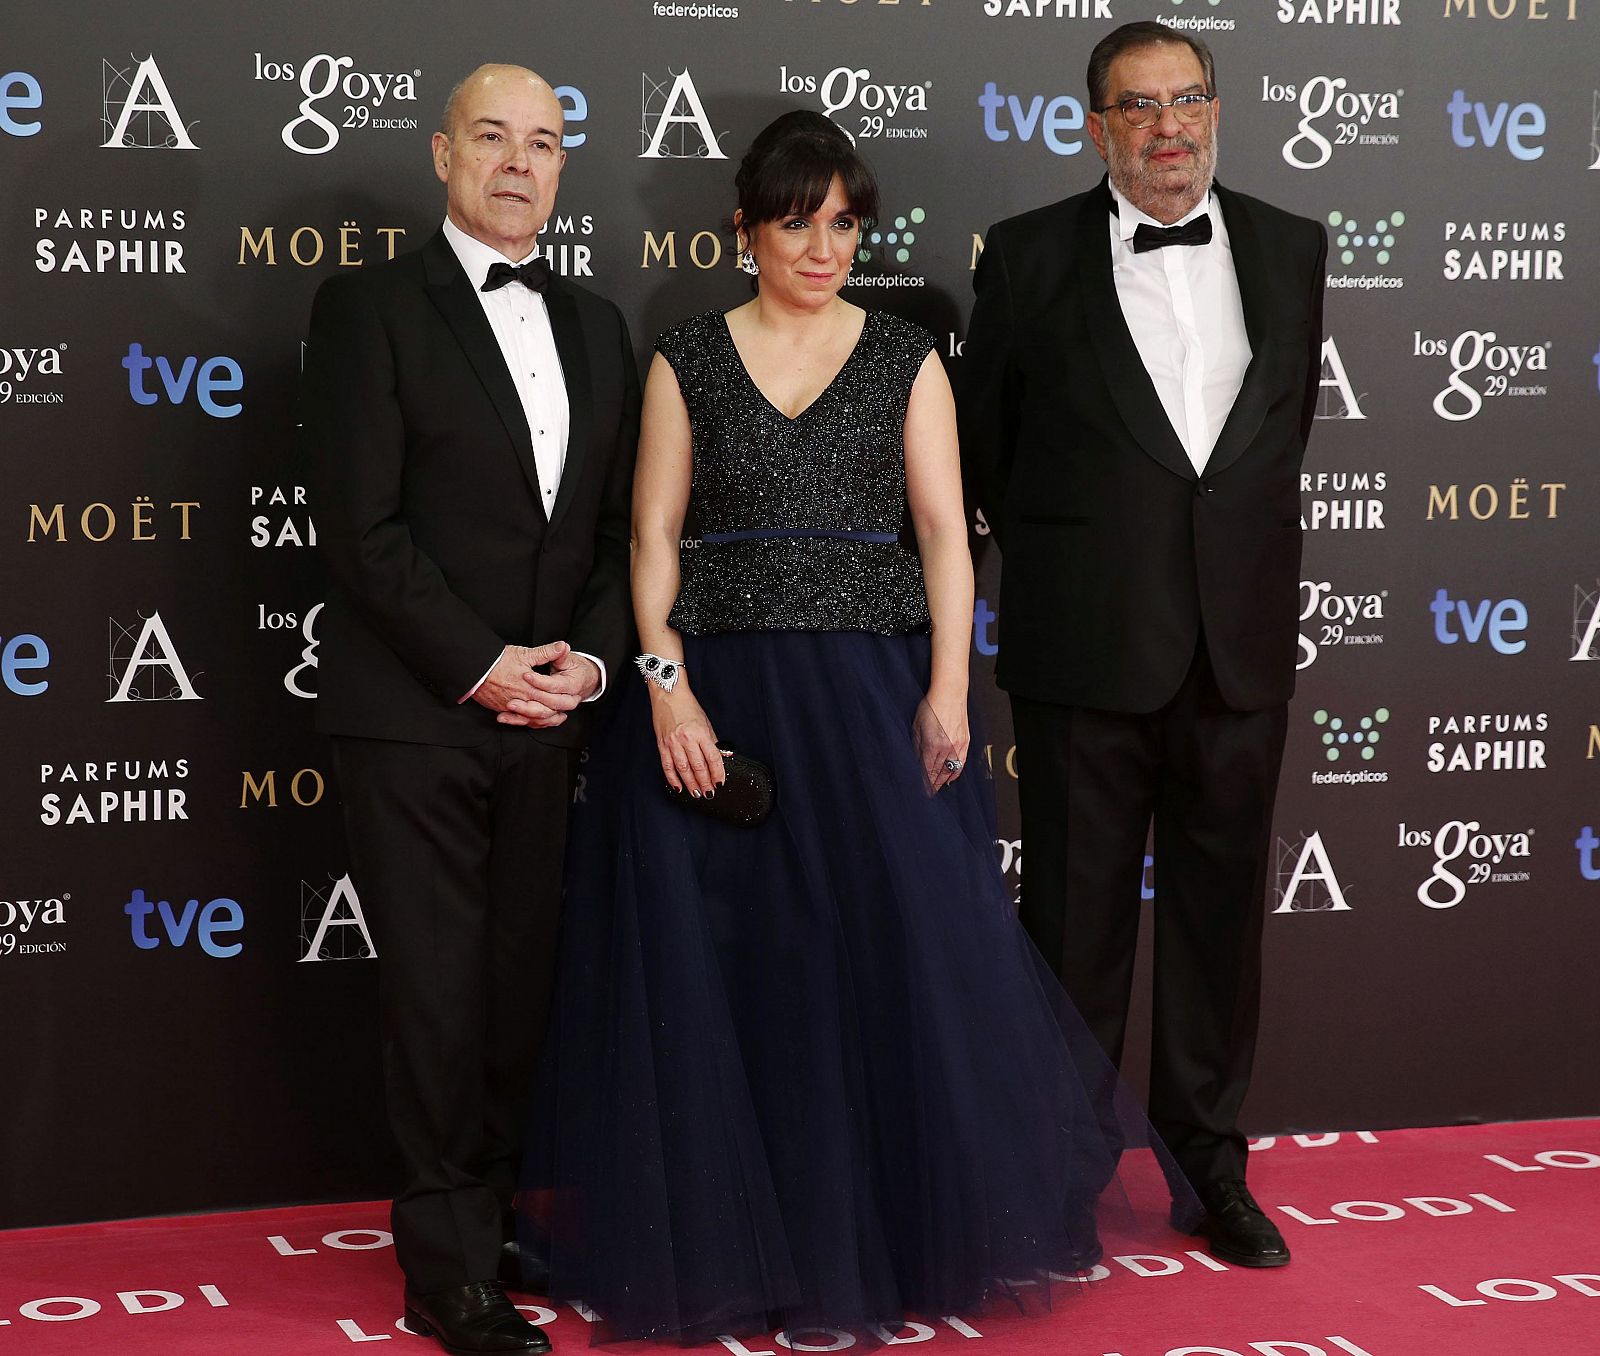 Spanish Film Academy vice presidents actor Antonio Resines (L) and Judith Colell pose along with the academy's president Enrique Gonzalez Macho (R) on the